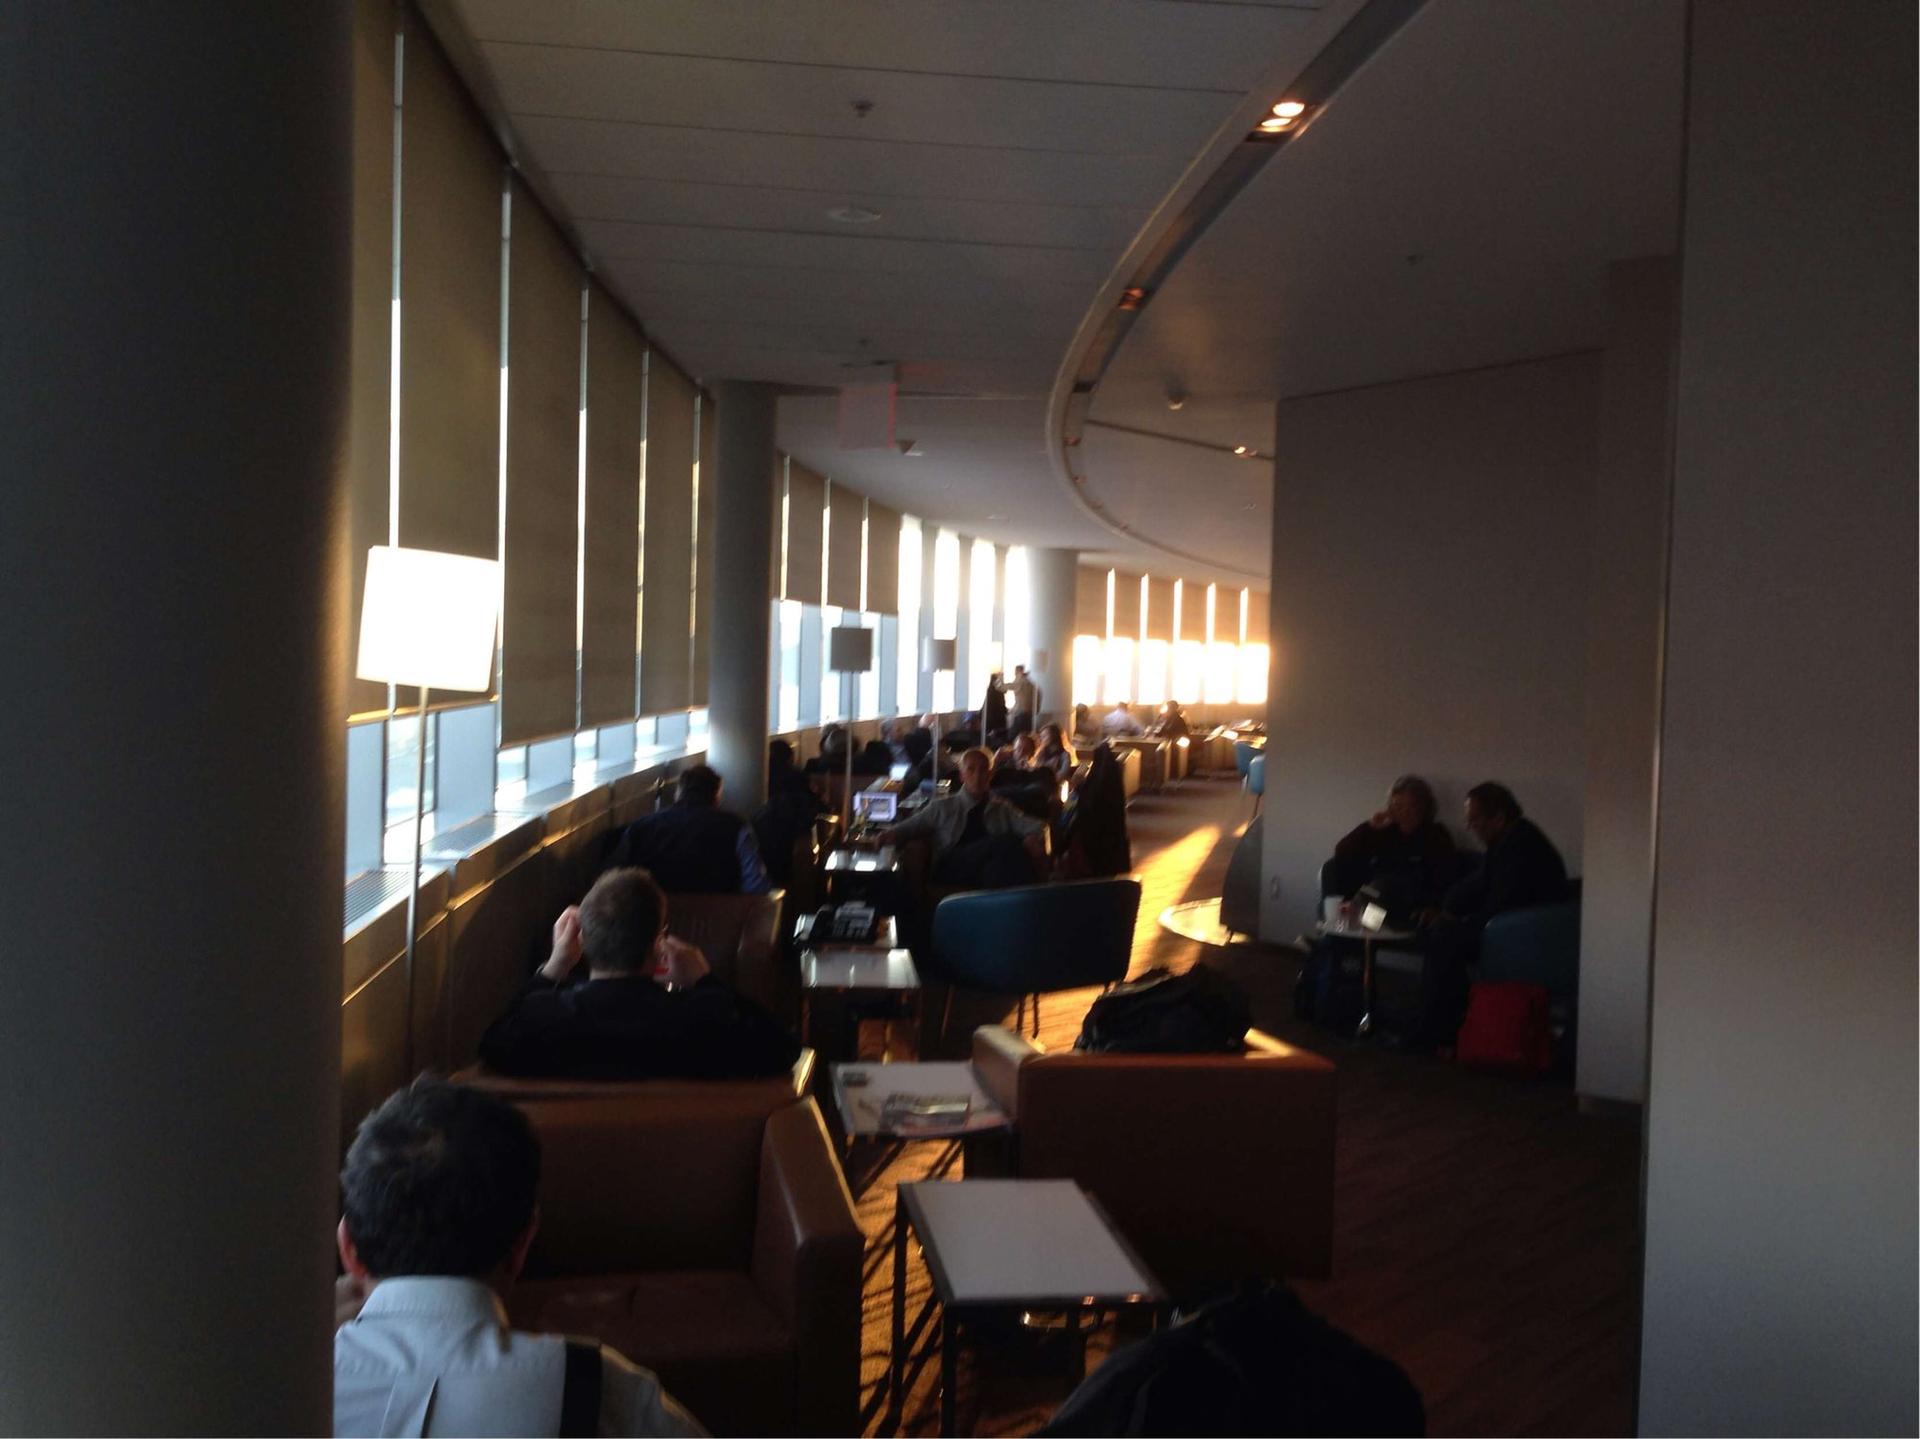 Air Canada Maple Leaf Lounge image 14 of 30